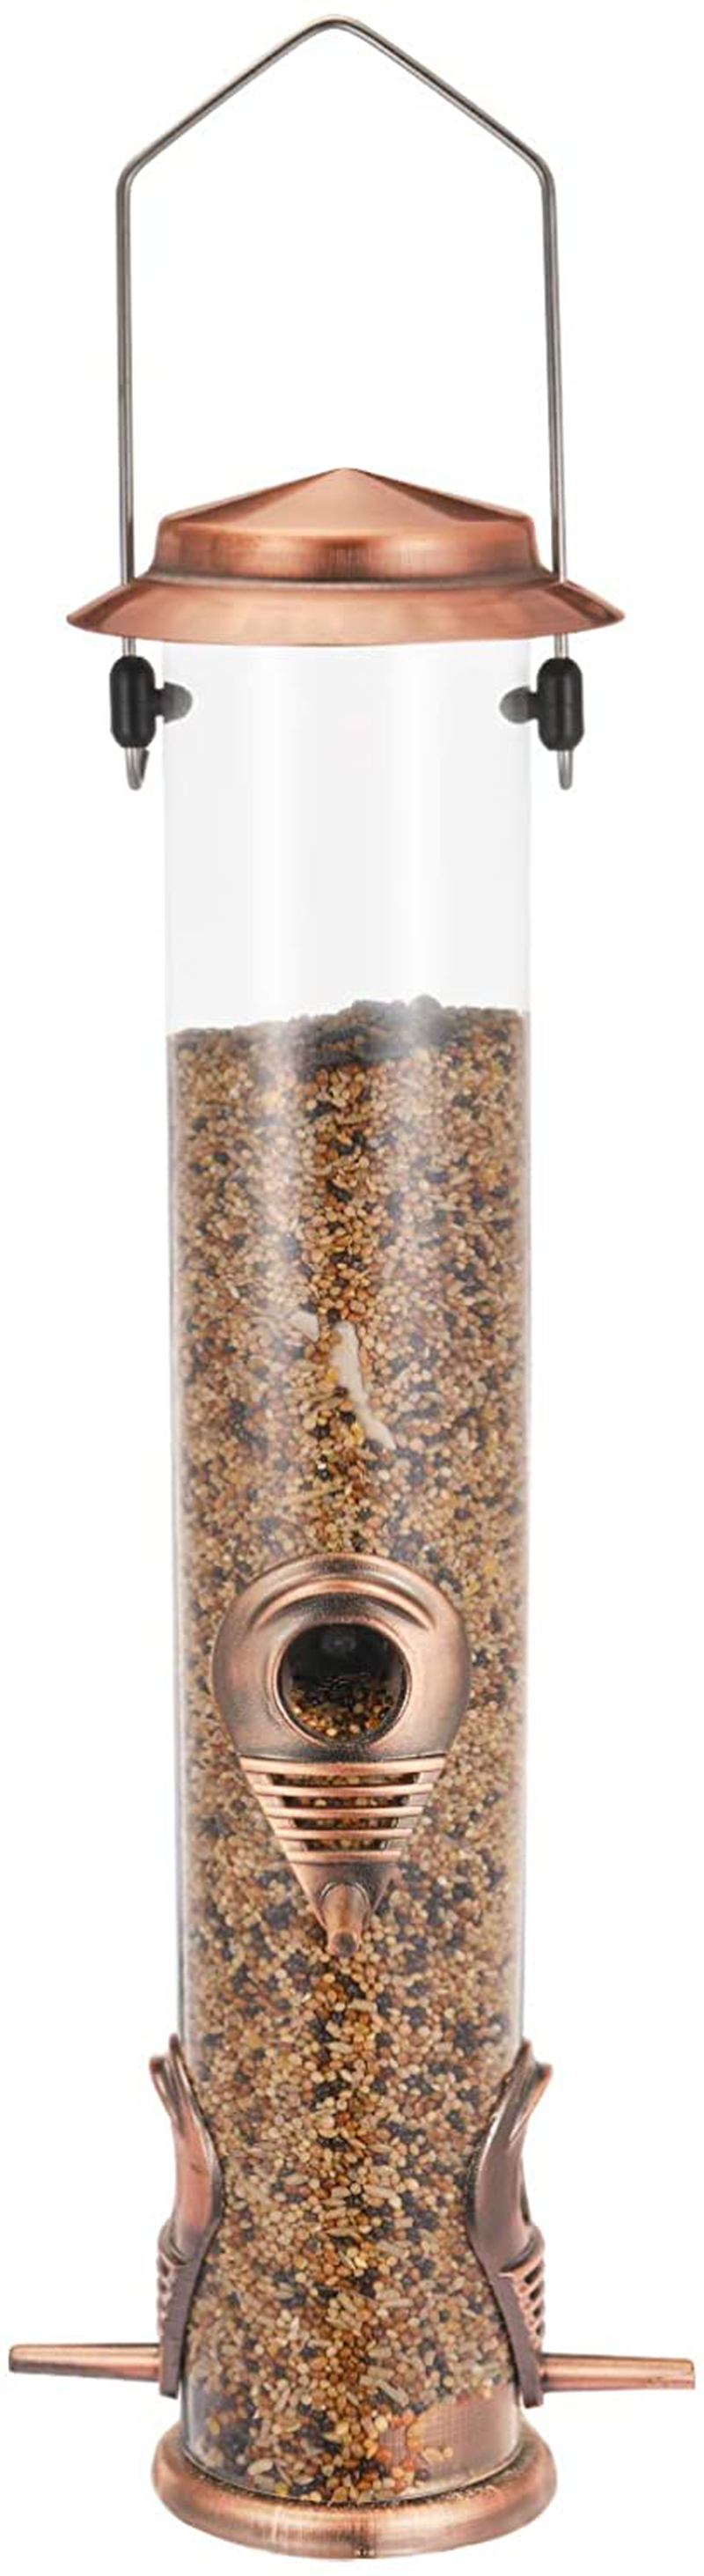 Ointo Garden Tube Bird Feeder Hanging with 4,Copper Feeding Ports Wild Bird Seed Feeder for Mix Seed Blends Heavy Duty